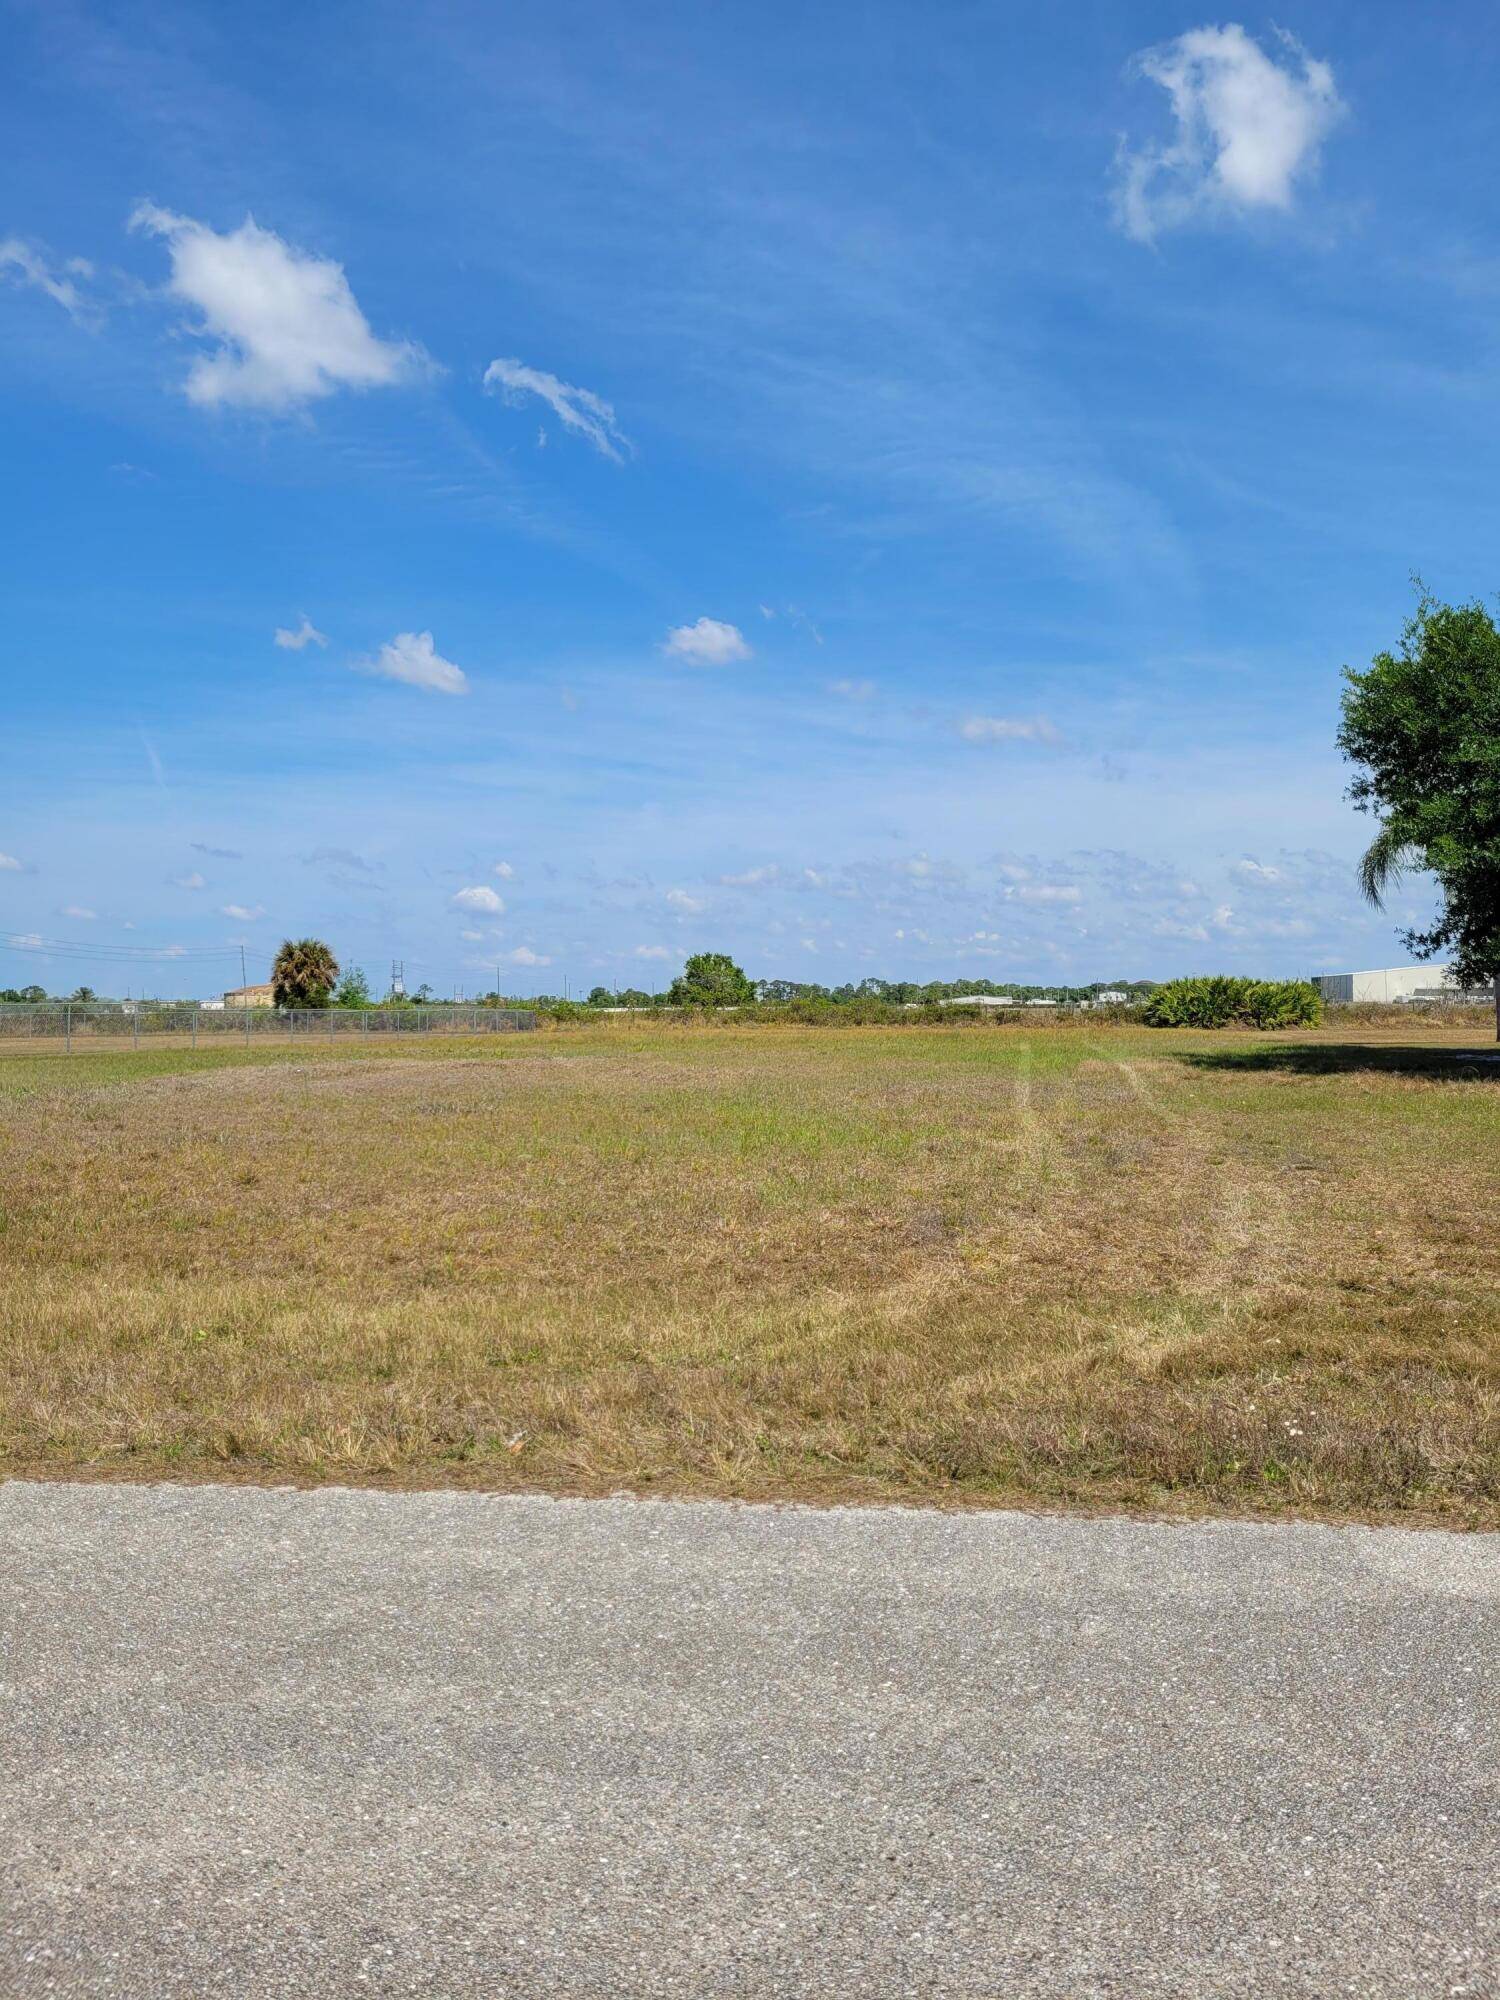 Lot is located in the golf community of Spring Lake International Golf Resort.